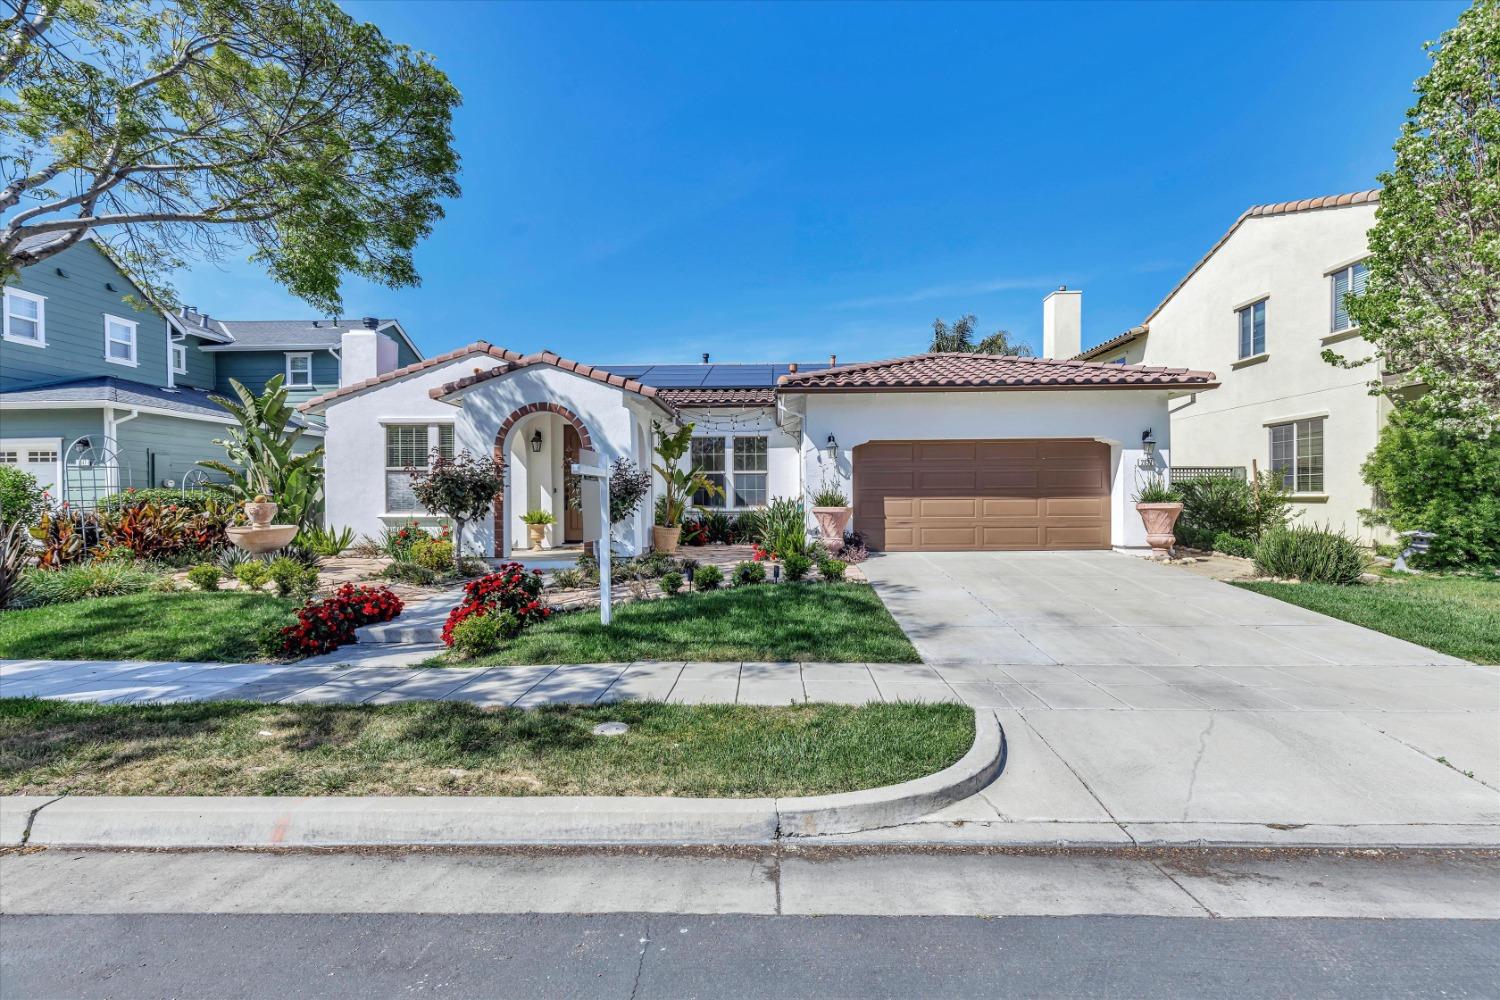 Photo of 2837 Green Haven Dr in Tracy, CA